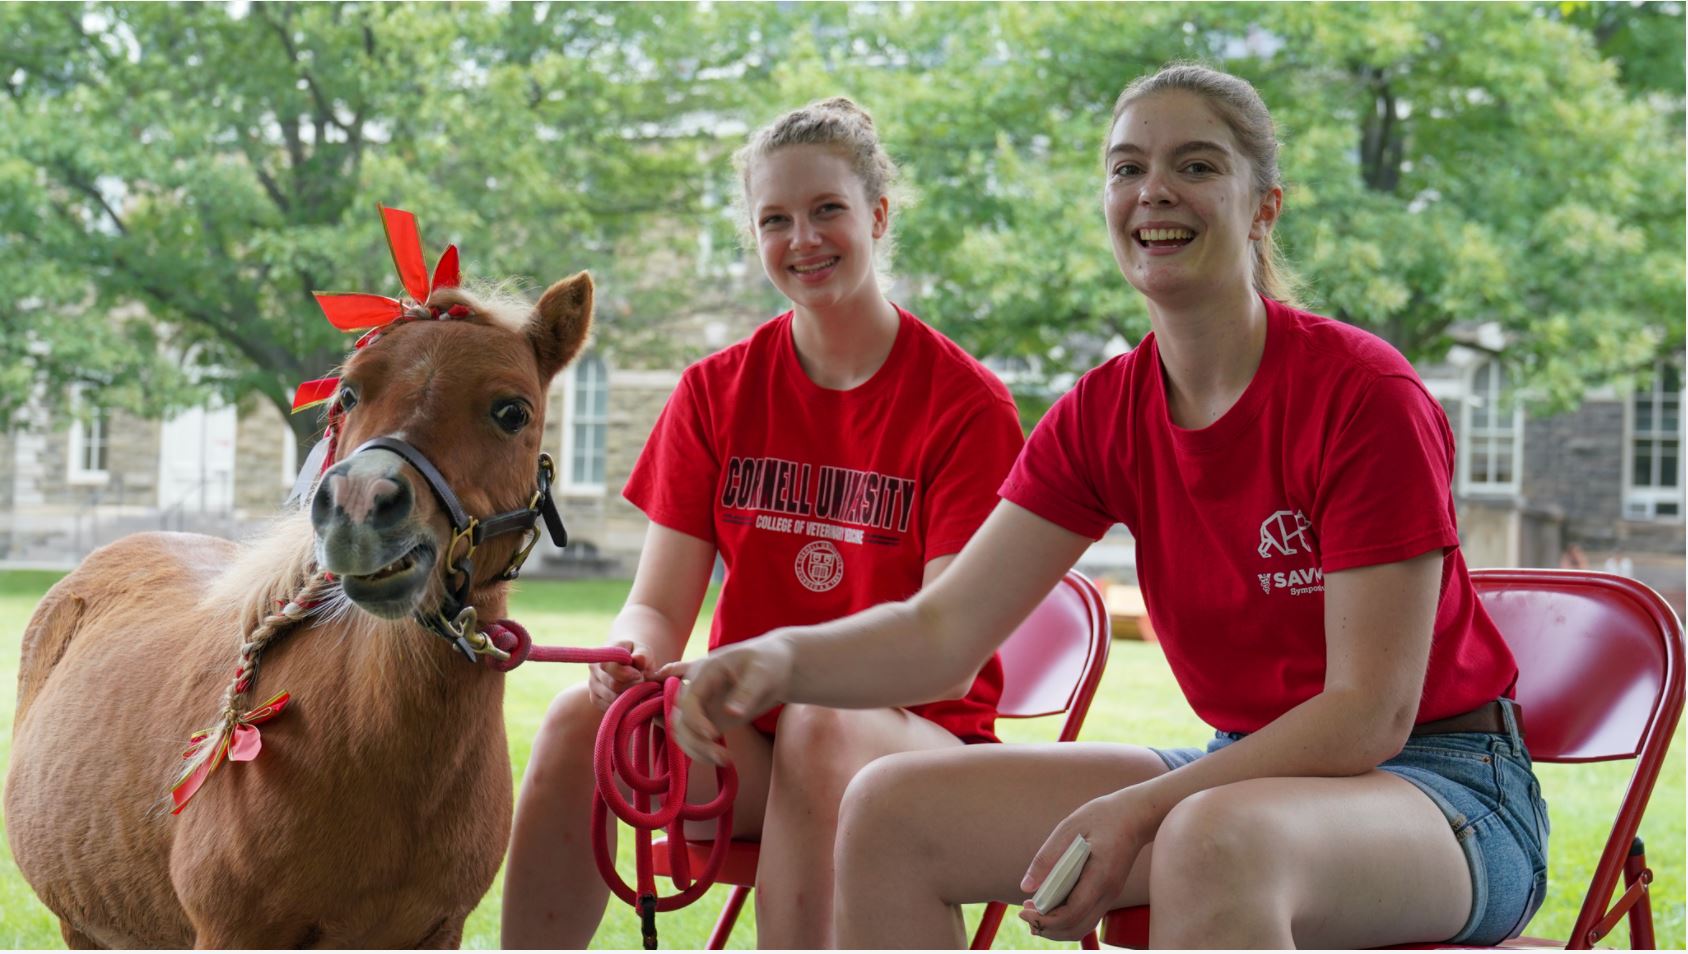 DVM students and Minnie the horse